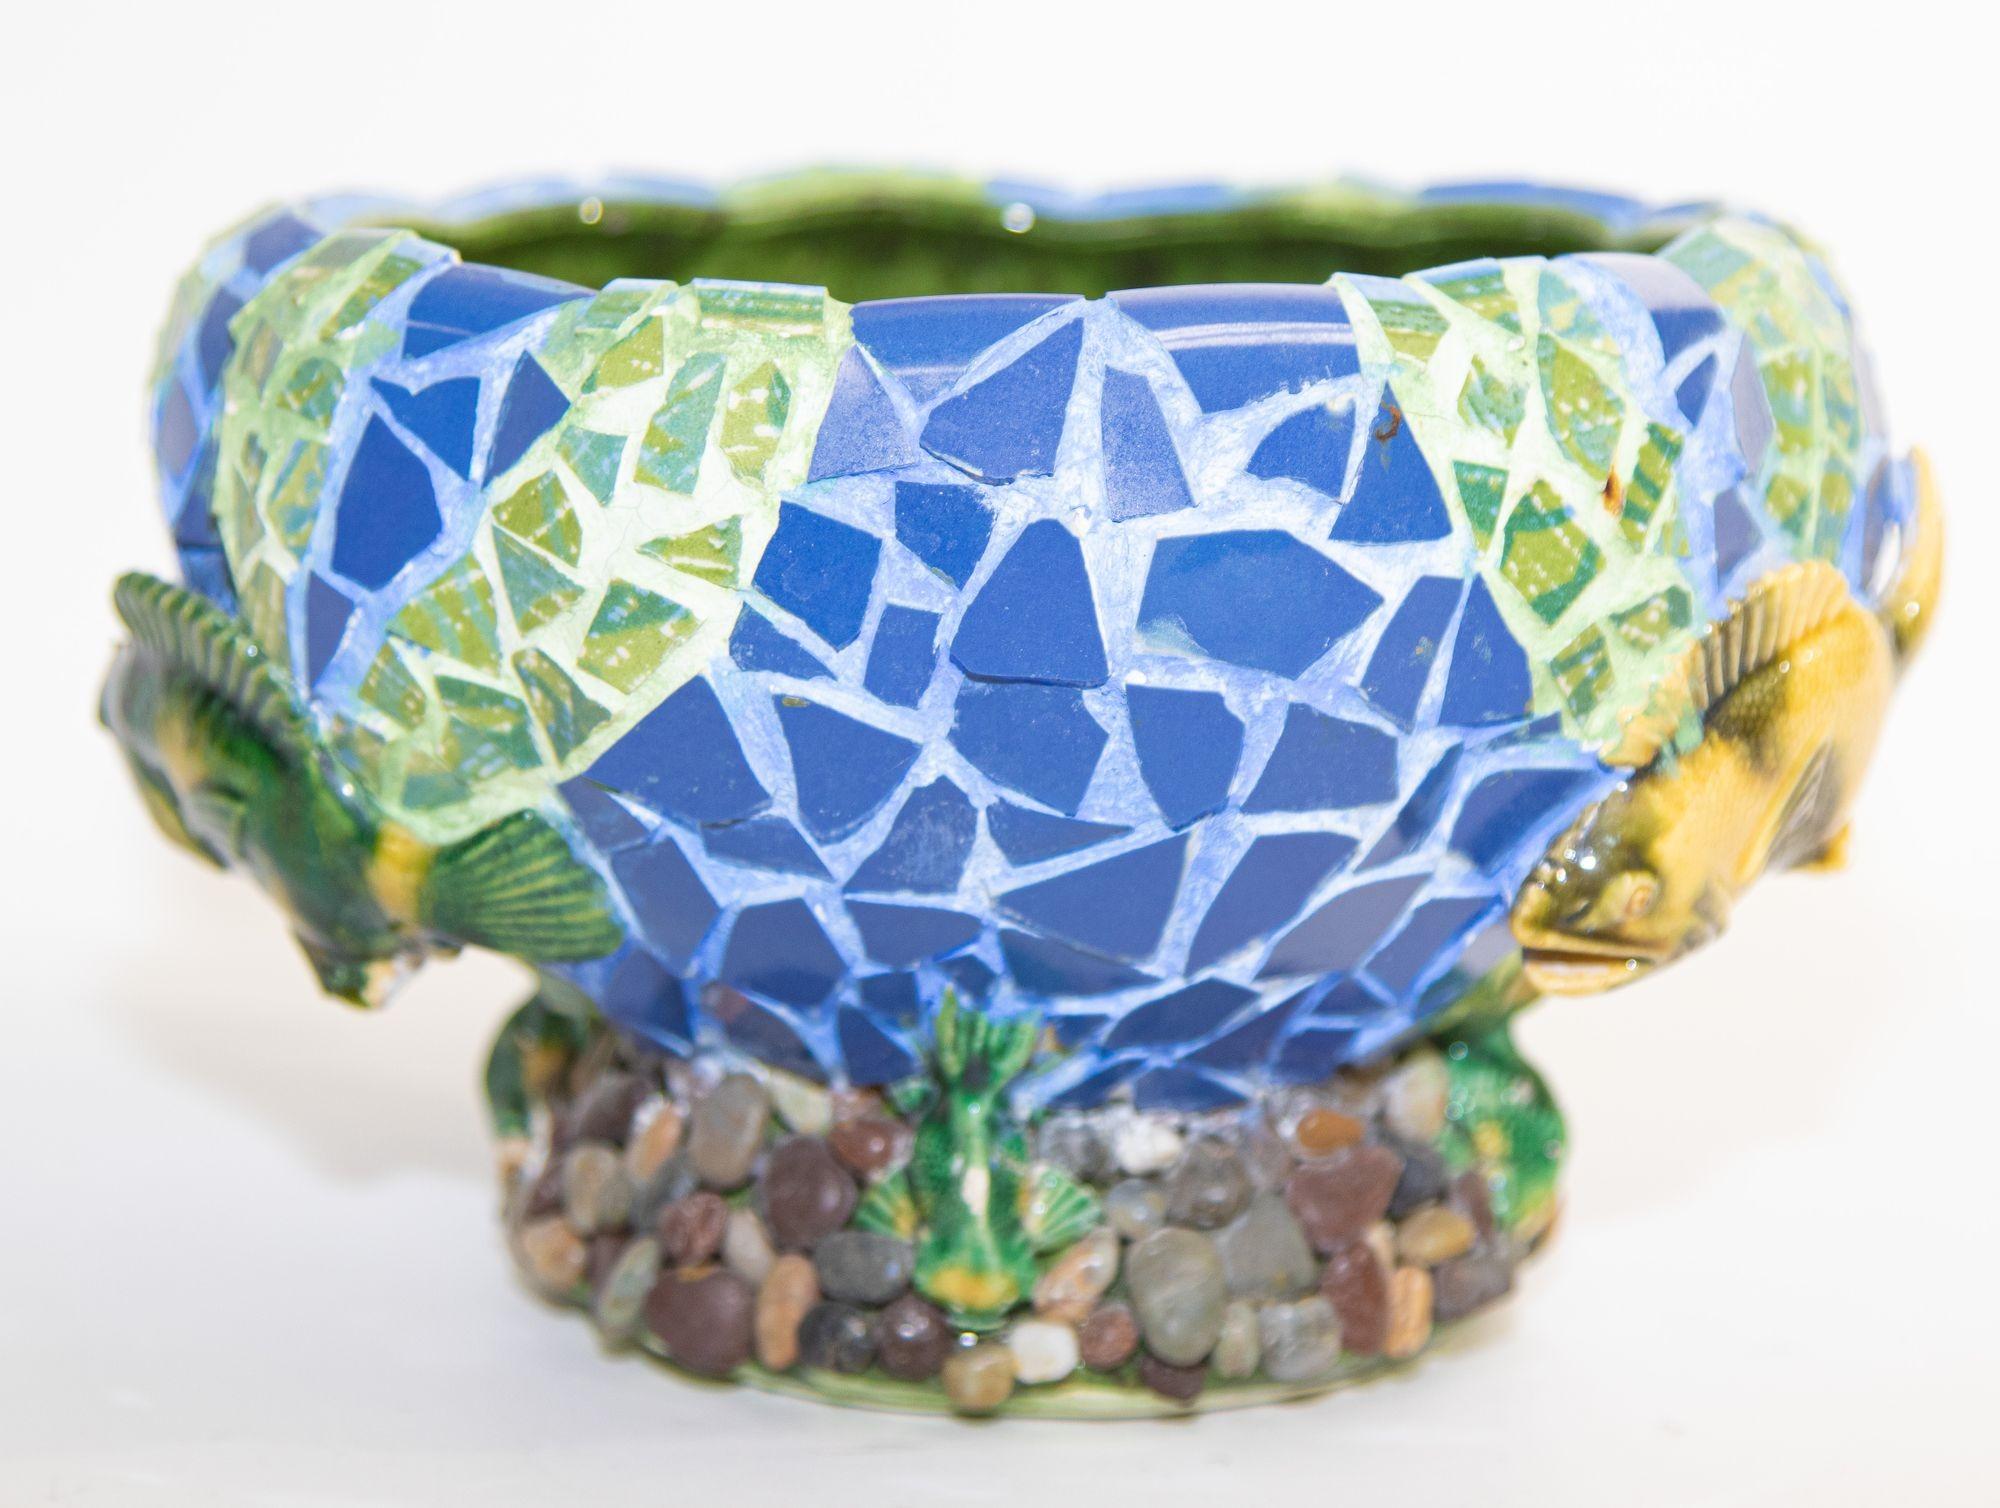 Jeannie Houston Antes Mosaic Mix Media Aquarius Planter In Good Condition For Sale In North Hollywood, CA